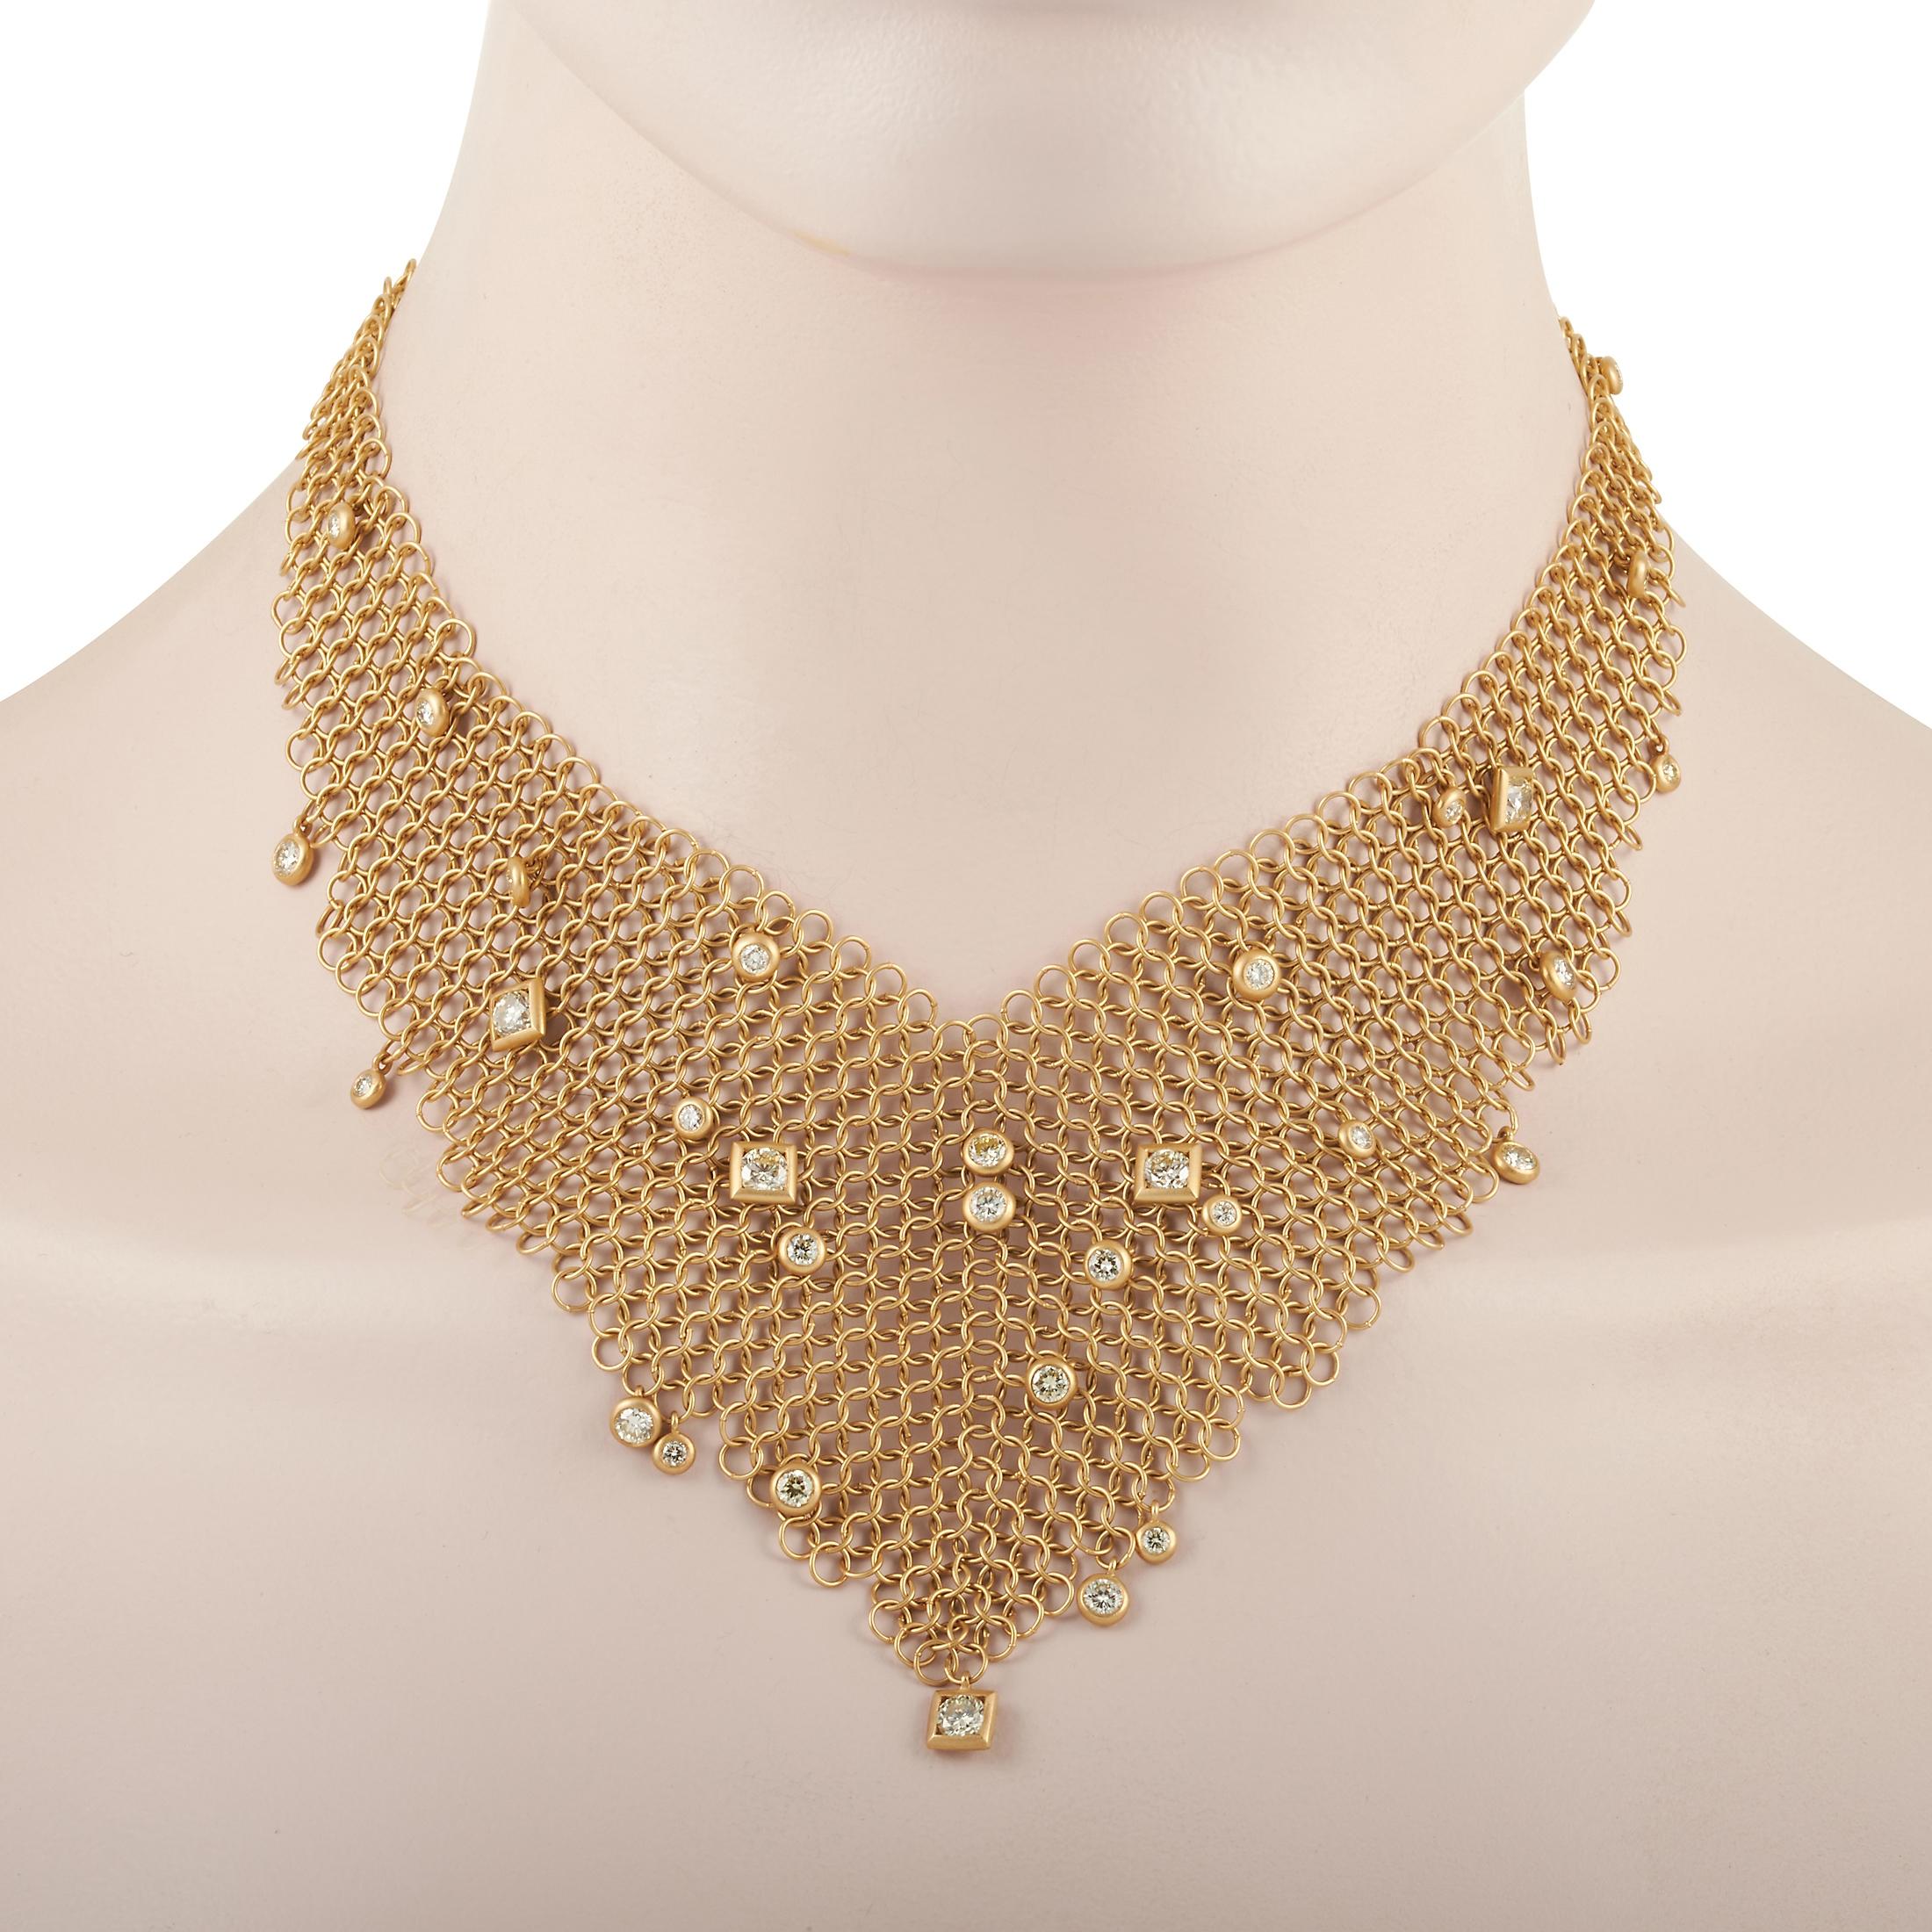 From luxury jewelry brand H. Stern, here is an 18K yellow gold bib necklace that can be a defining piece of your outfit. It exudes an avant-garde style with a hint of romantic flair given its bib-like triangular shape which drops just below the